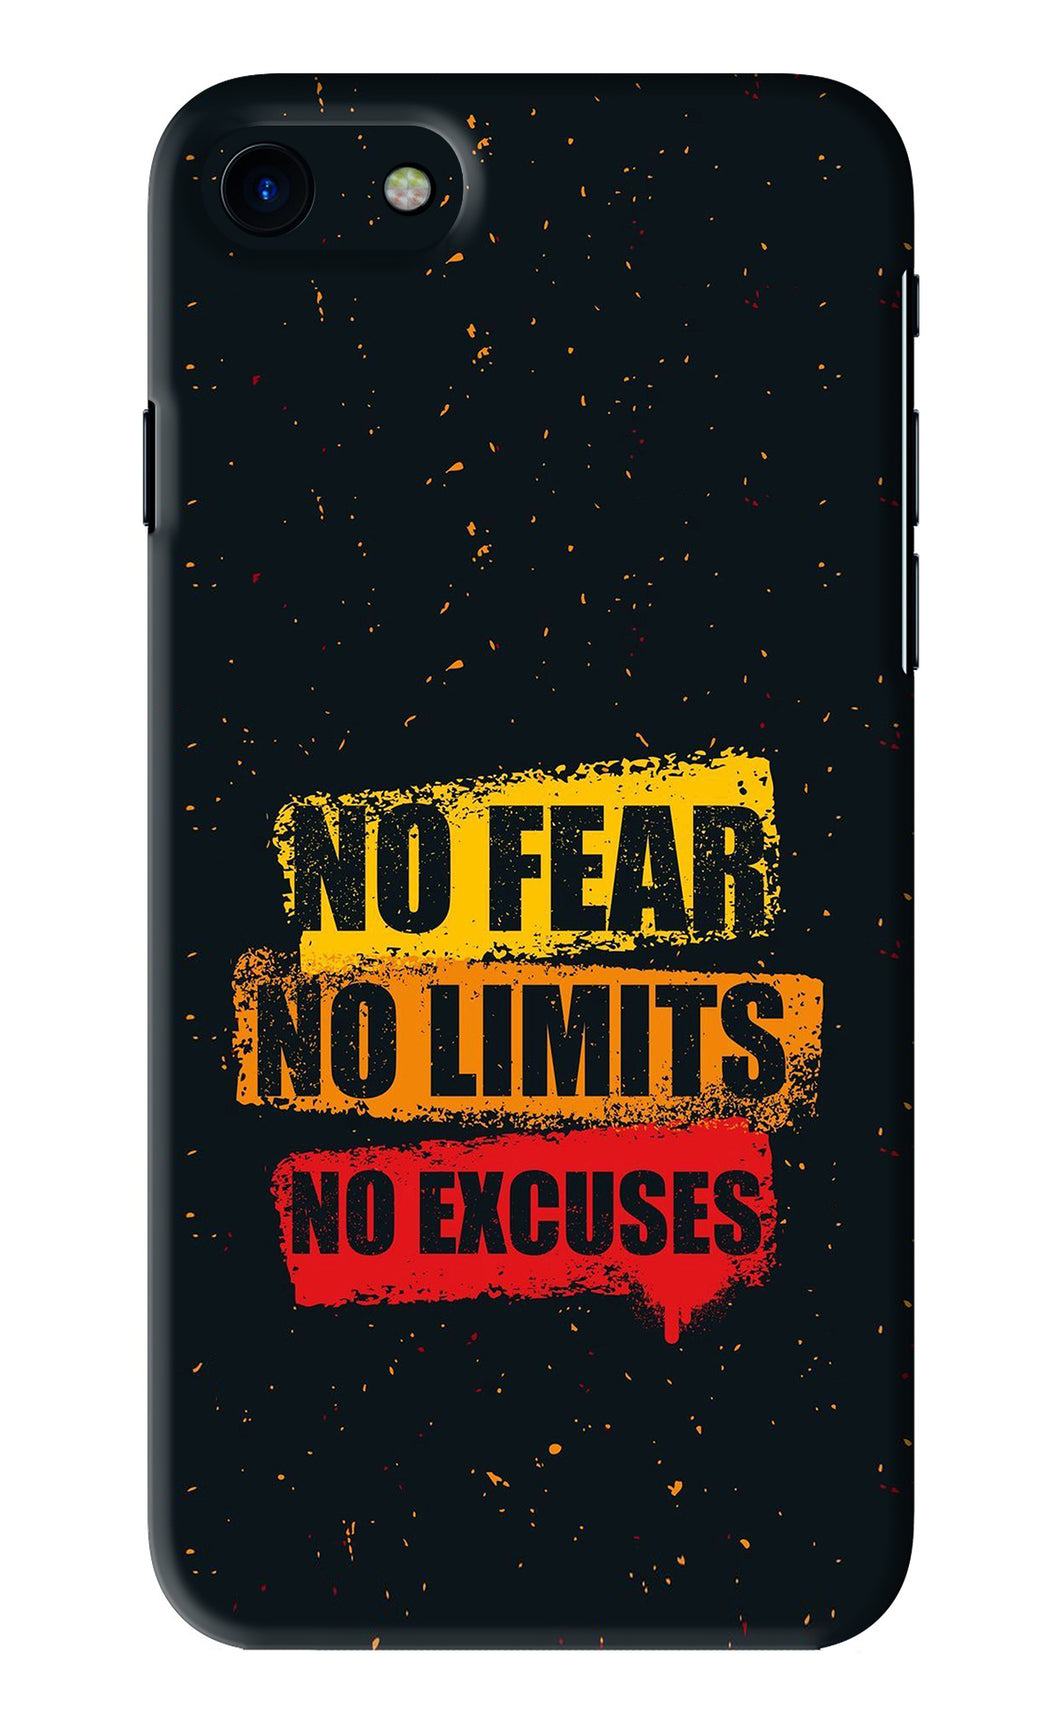 No Fear No Limits No Excuses iPhone 8 Back Skin Wrap